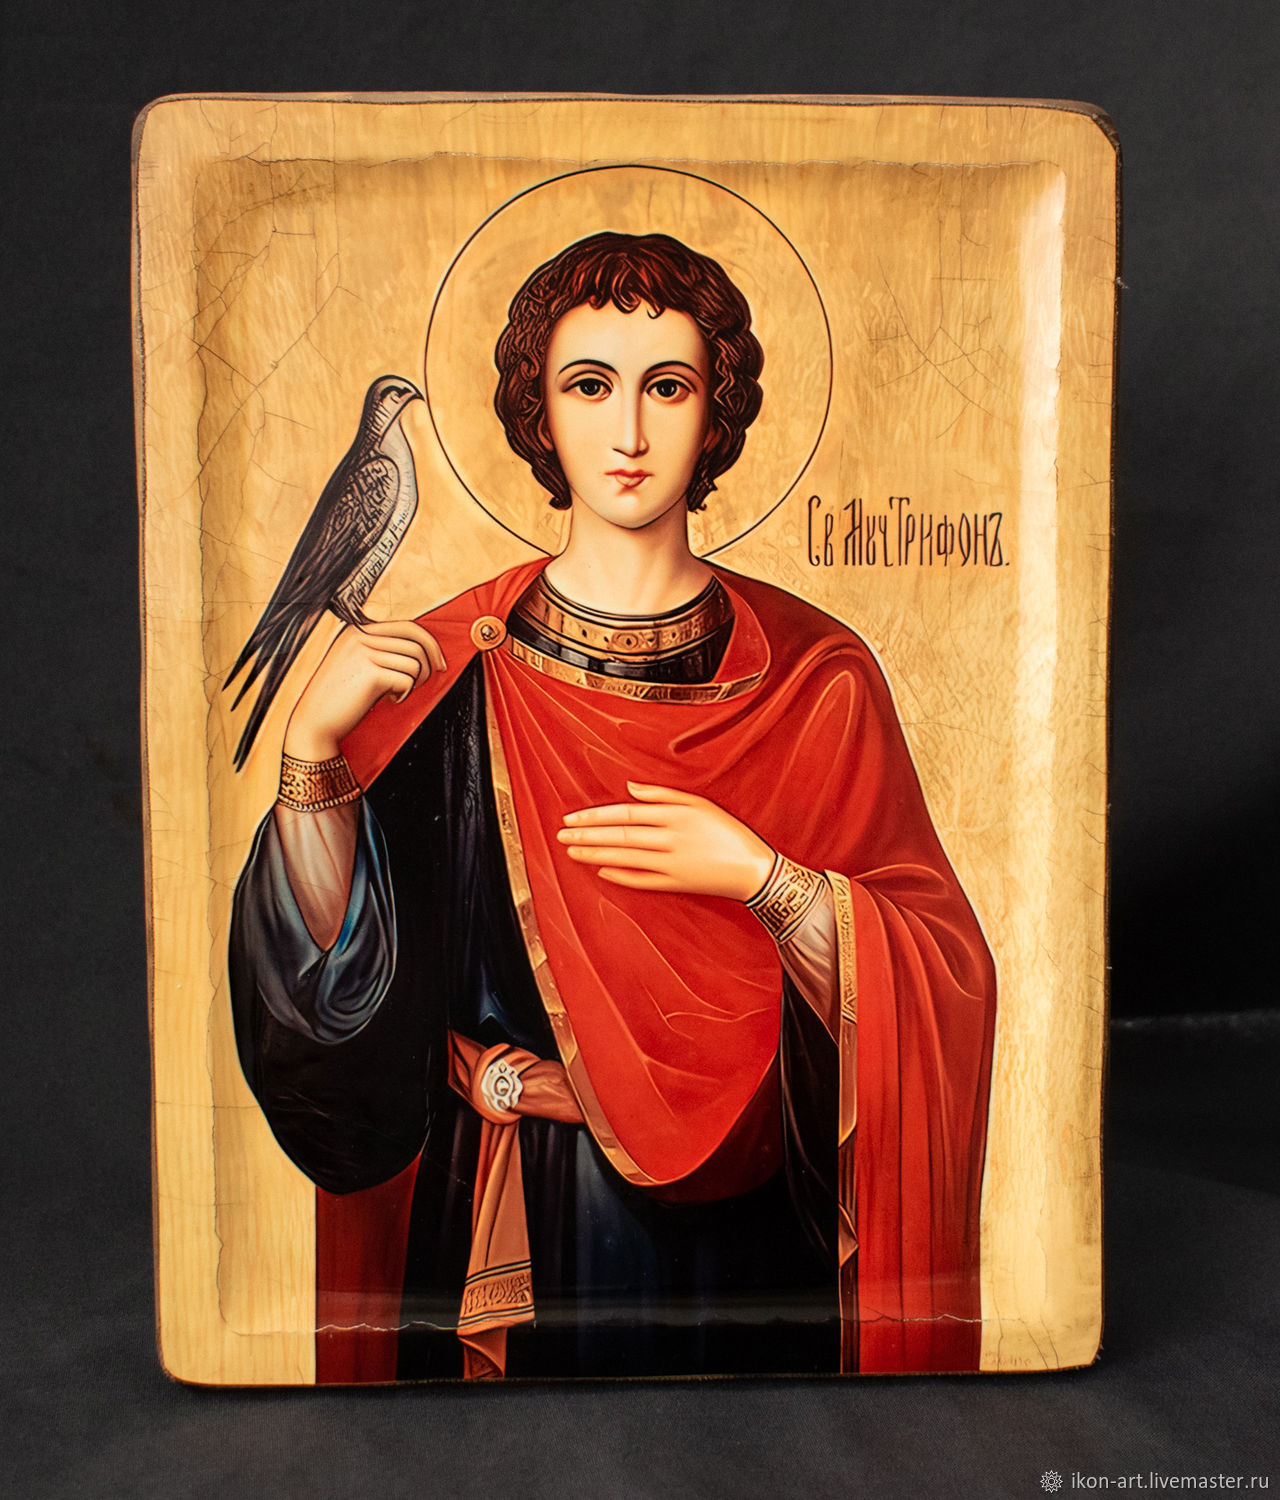 Icon wood with the ark, 'St. Trifon', Icons, Simferopol,  Фото №1